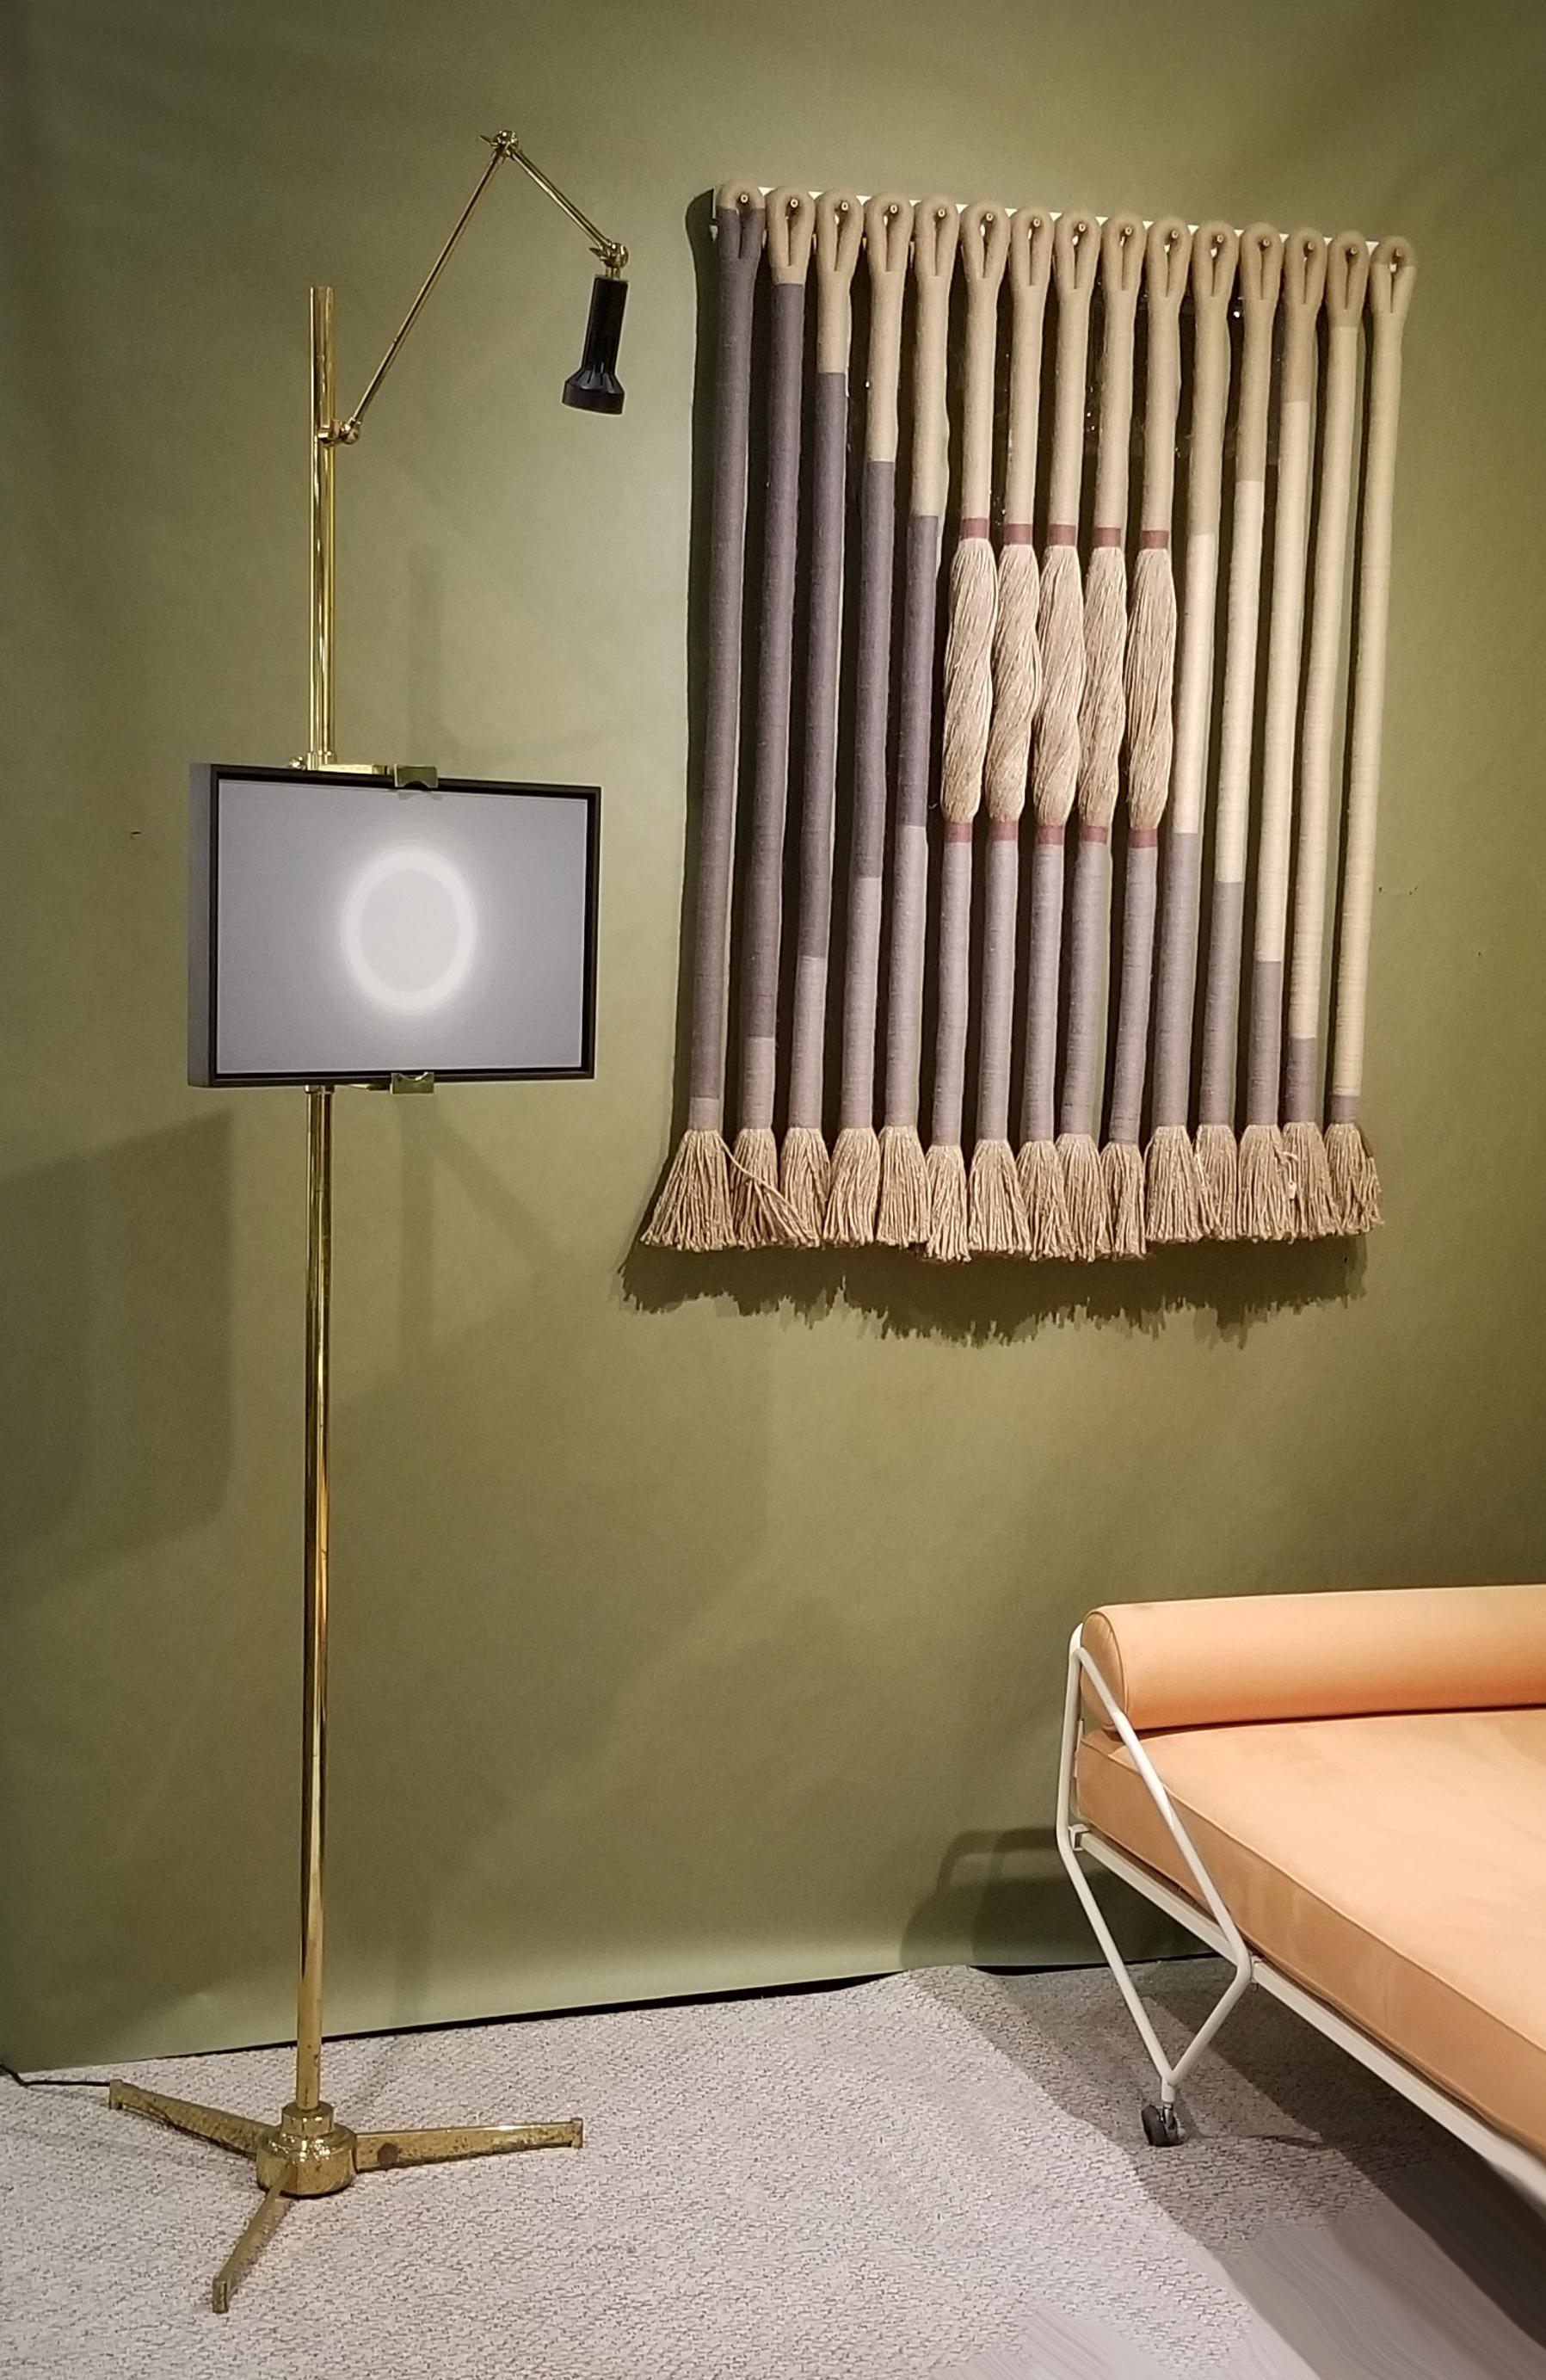 All original example of the Arredoluce Easel lamp. This is the more desirable version with the elegantly tapering tripod base. This example retains the original label to the underside of the fixture and the original foot switch works as intended.